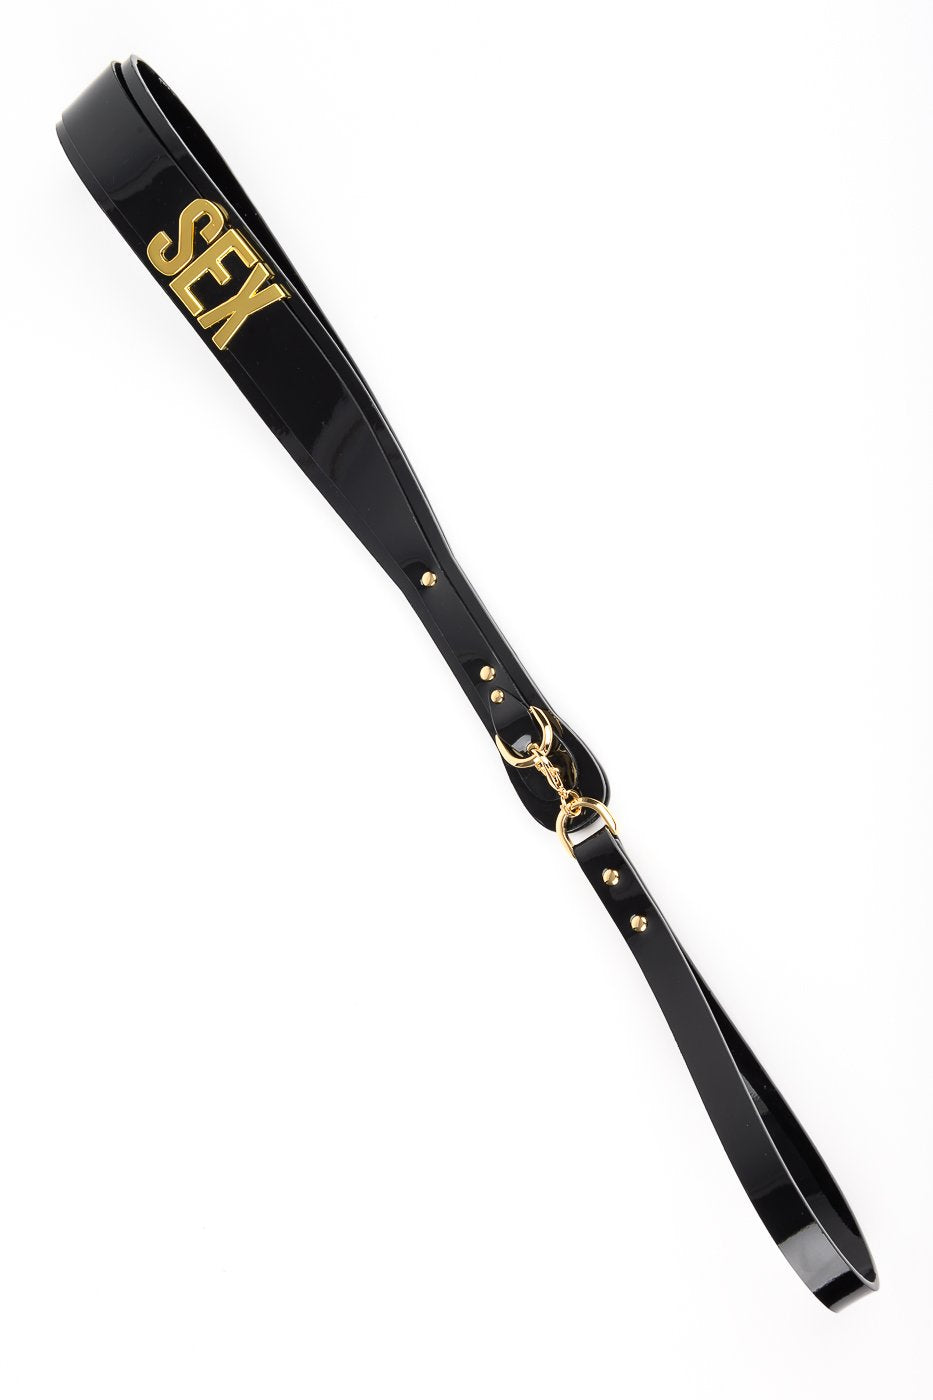 Sex Paddle in Black and Gold By Fraulein Kink